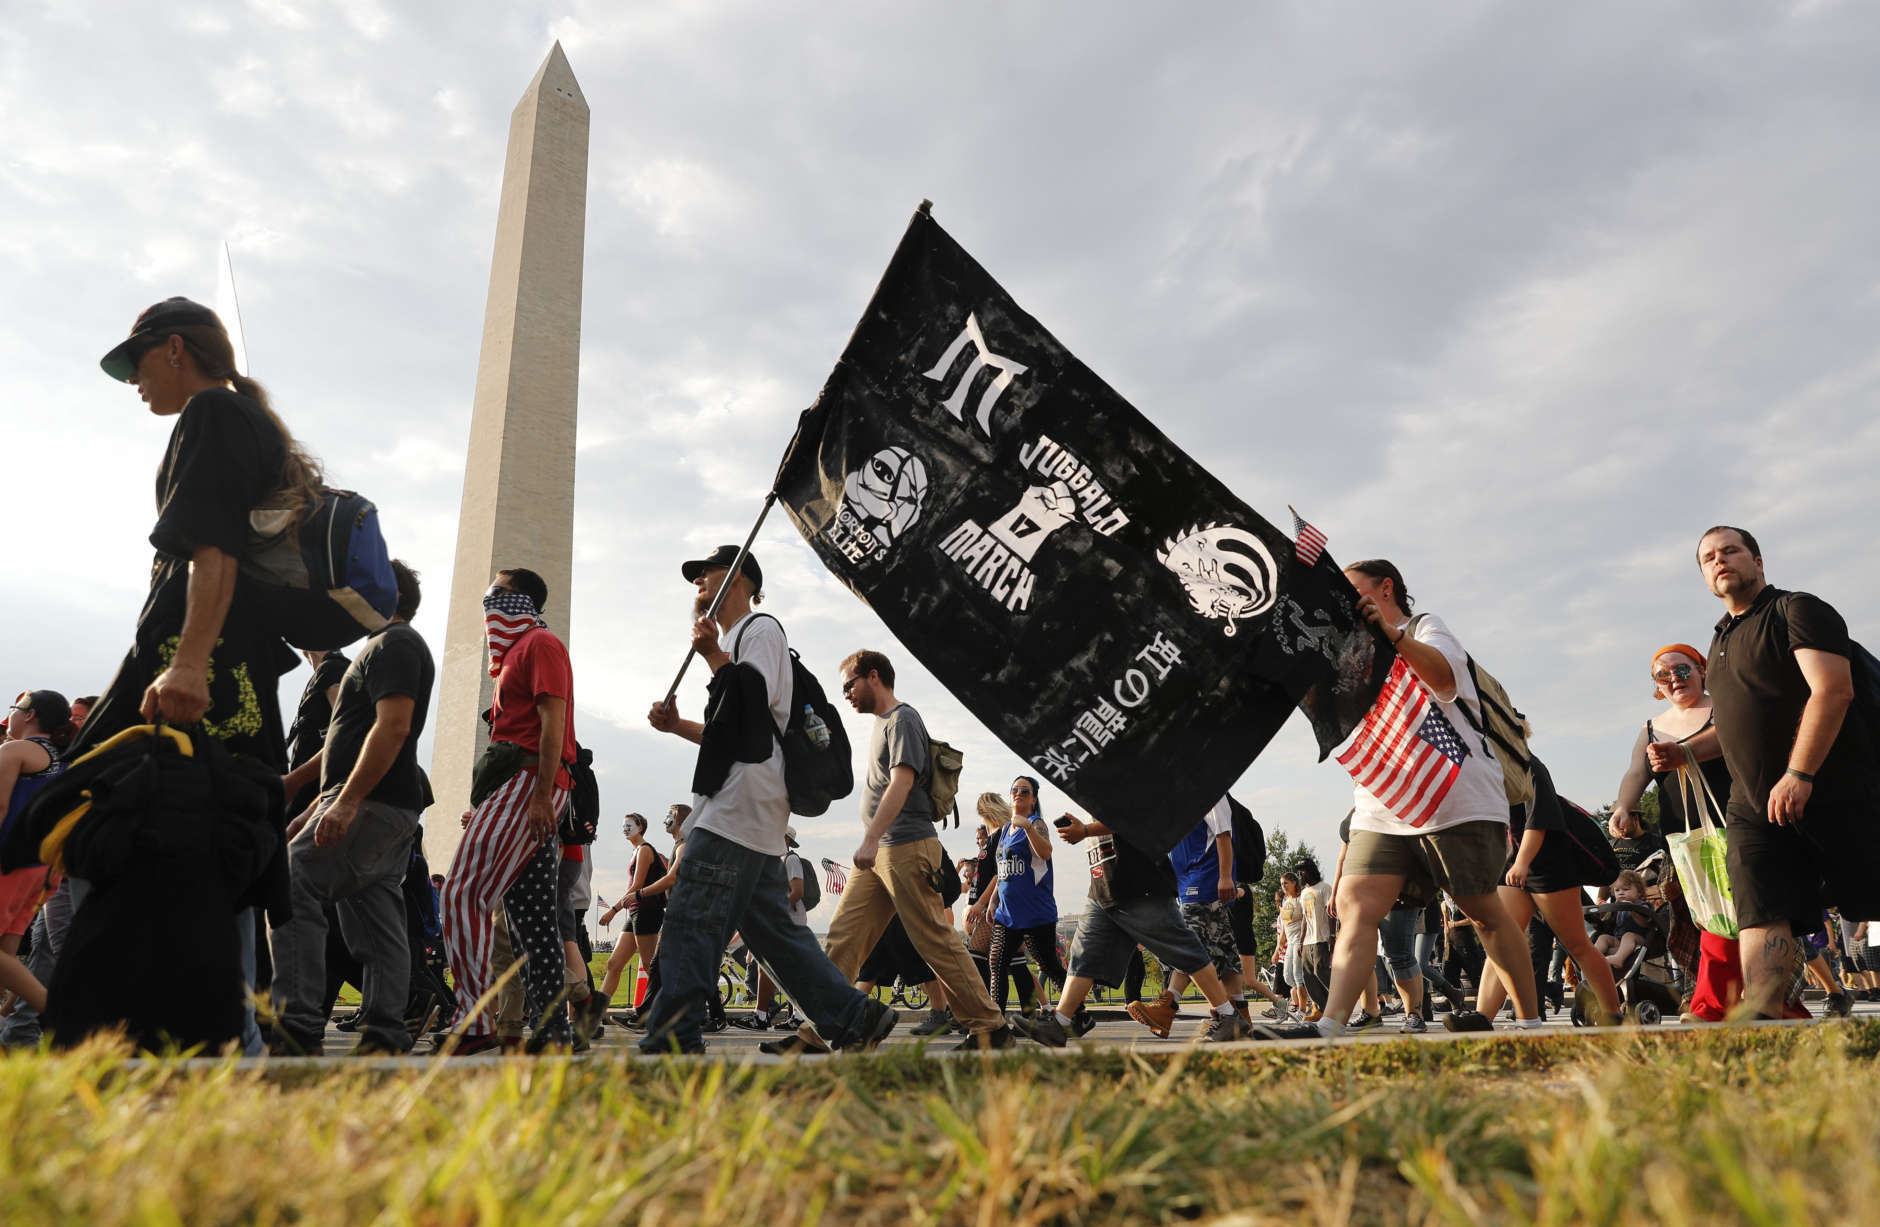 Juggalos, as supporters of the rap group Insane Clown Posse are known, march past the Washington Monument as they head towards the Lincoln Memorial in Washington during a rally, Saturday, Sept. 16, 2017. The event was held to demand that the FBI rescind its classification of the juggalos as a "loosely organized hybrid gang." (AP Photo/Pablo Martinez Monsivais)